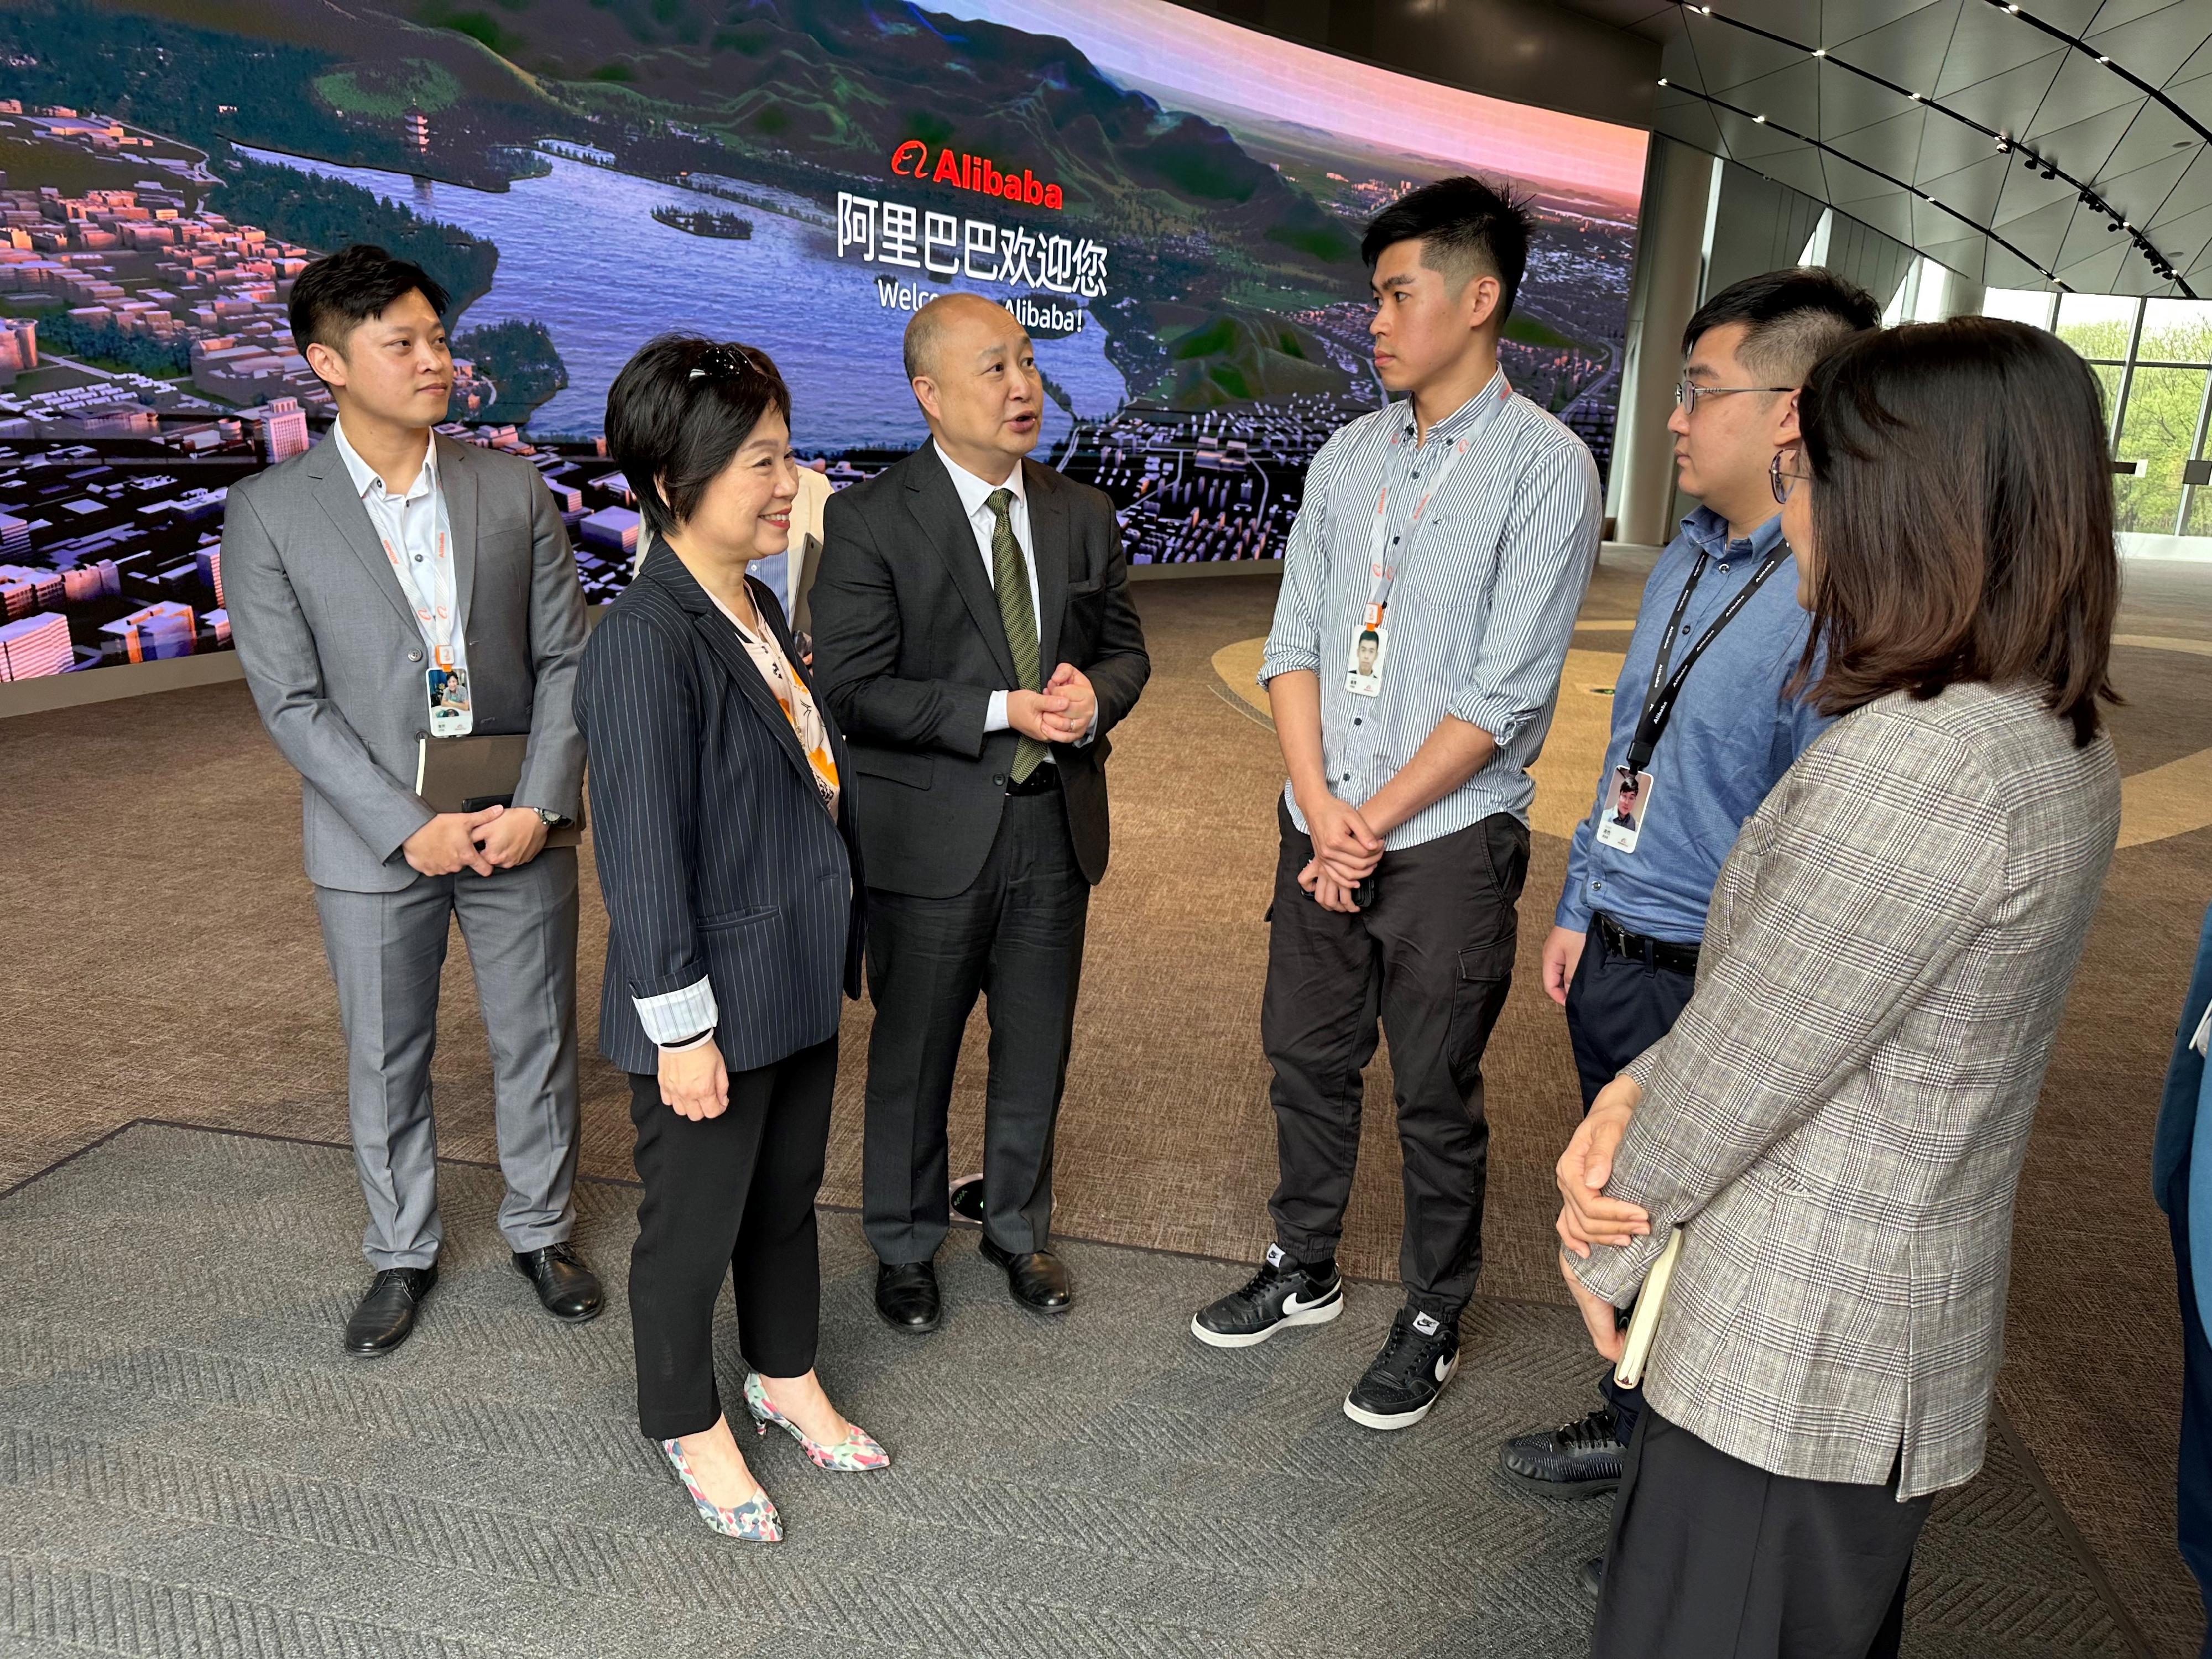 The Secretary for Education, Dr Choi Yuk-lin, this morning (April 11) visited the Xixi Park of Alibaba Group to understand innovation and technology development and meet Hong Kong staff there. Photo shows Dr Choi (second left) chatting with the staff.